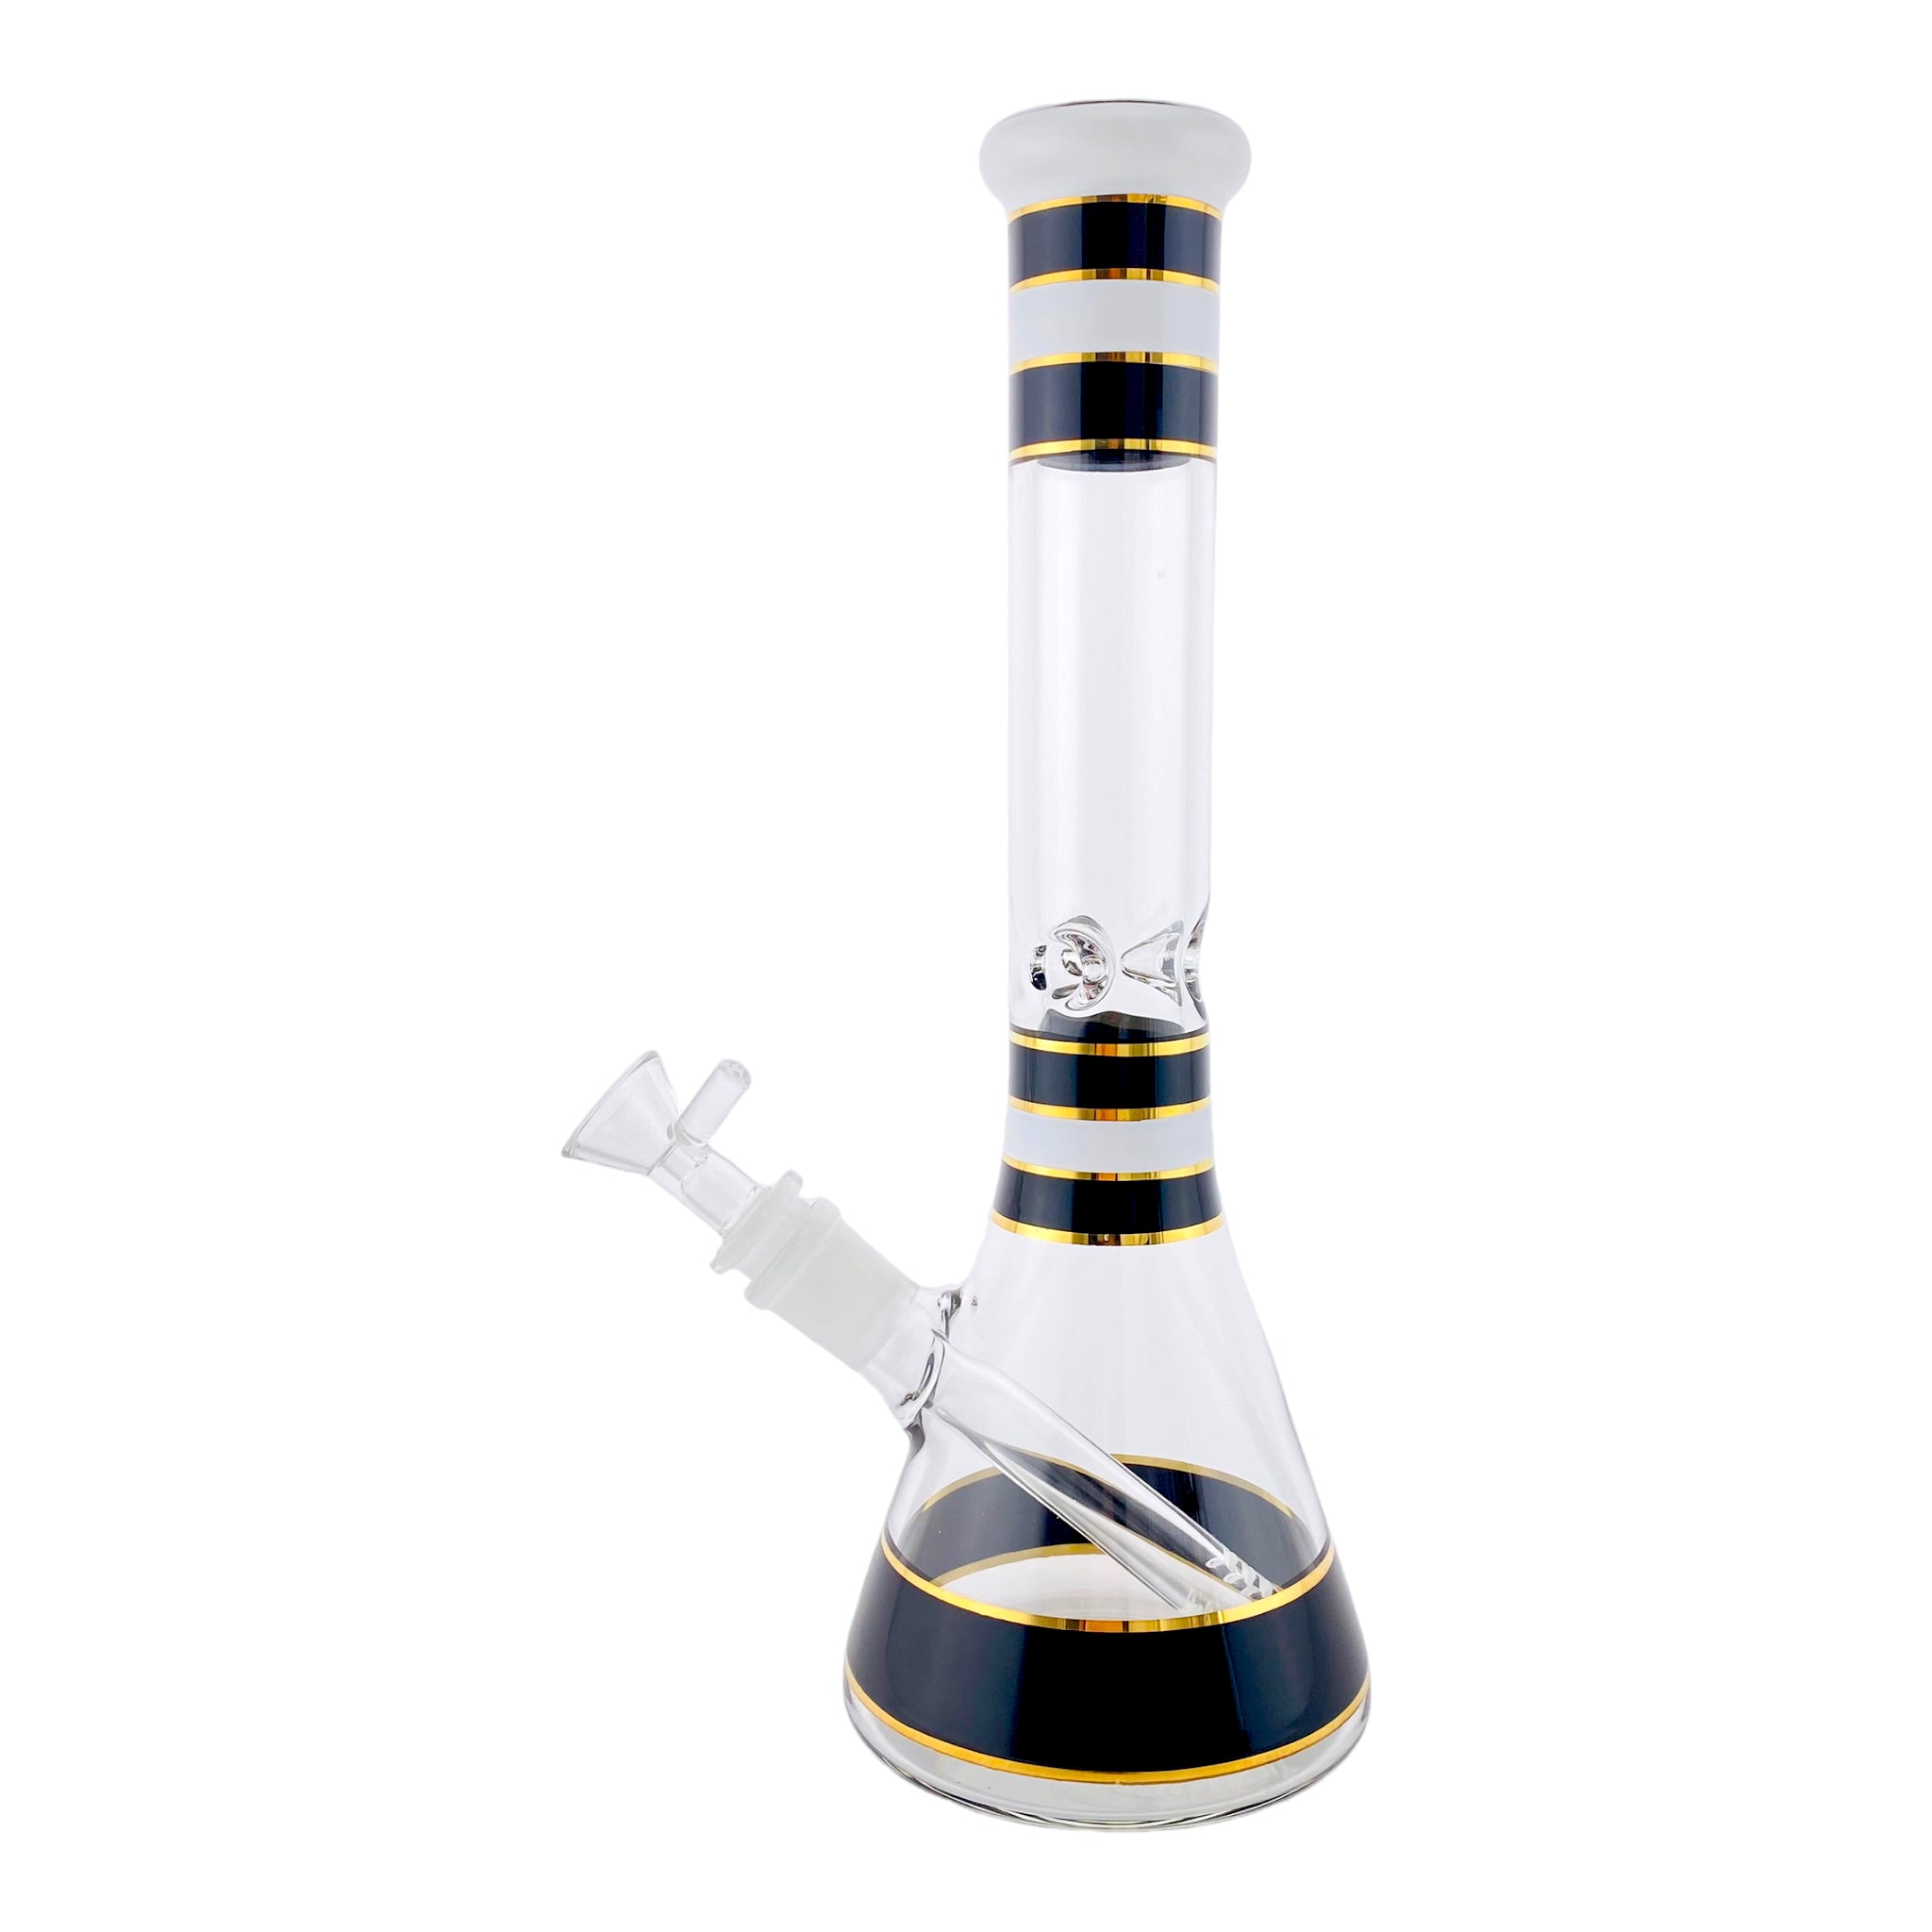 12 Inch Glass Beaker Bong With Black, White, And Gold Accents